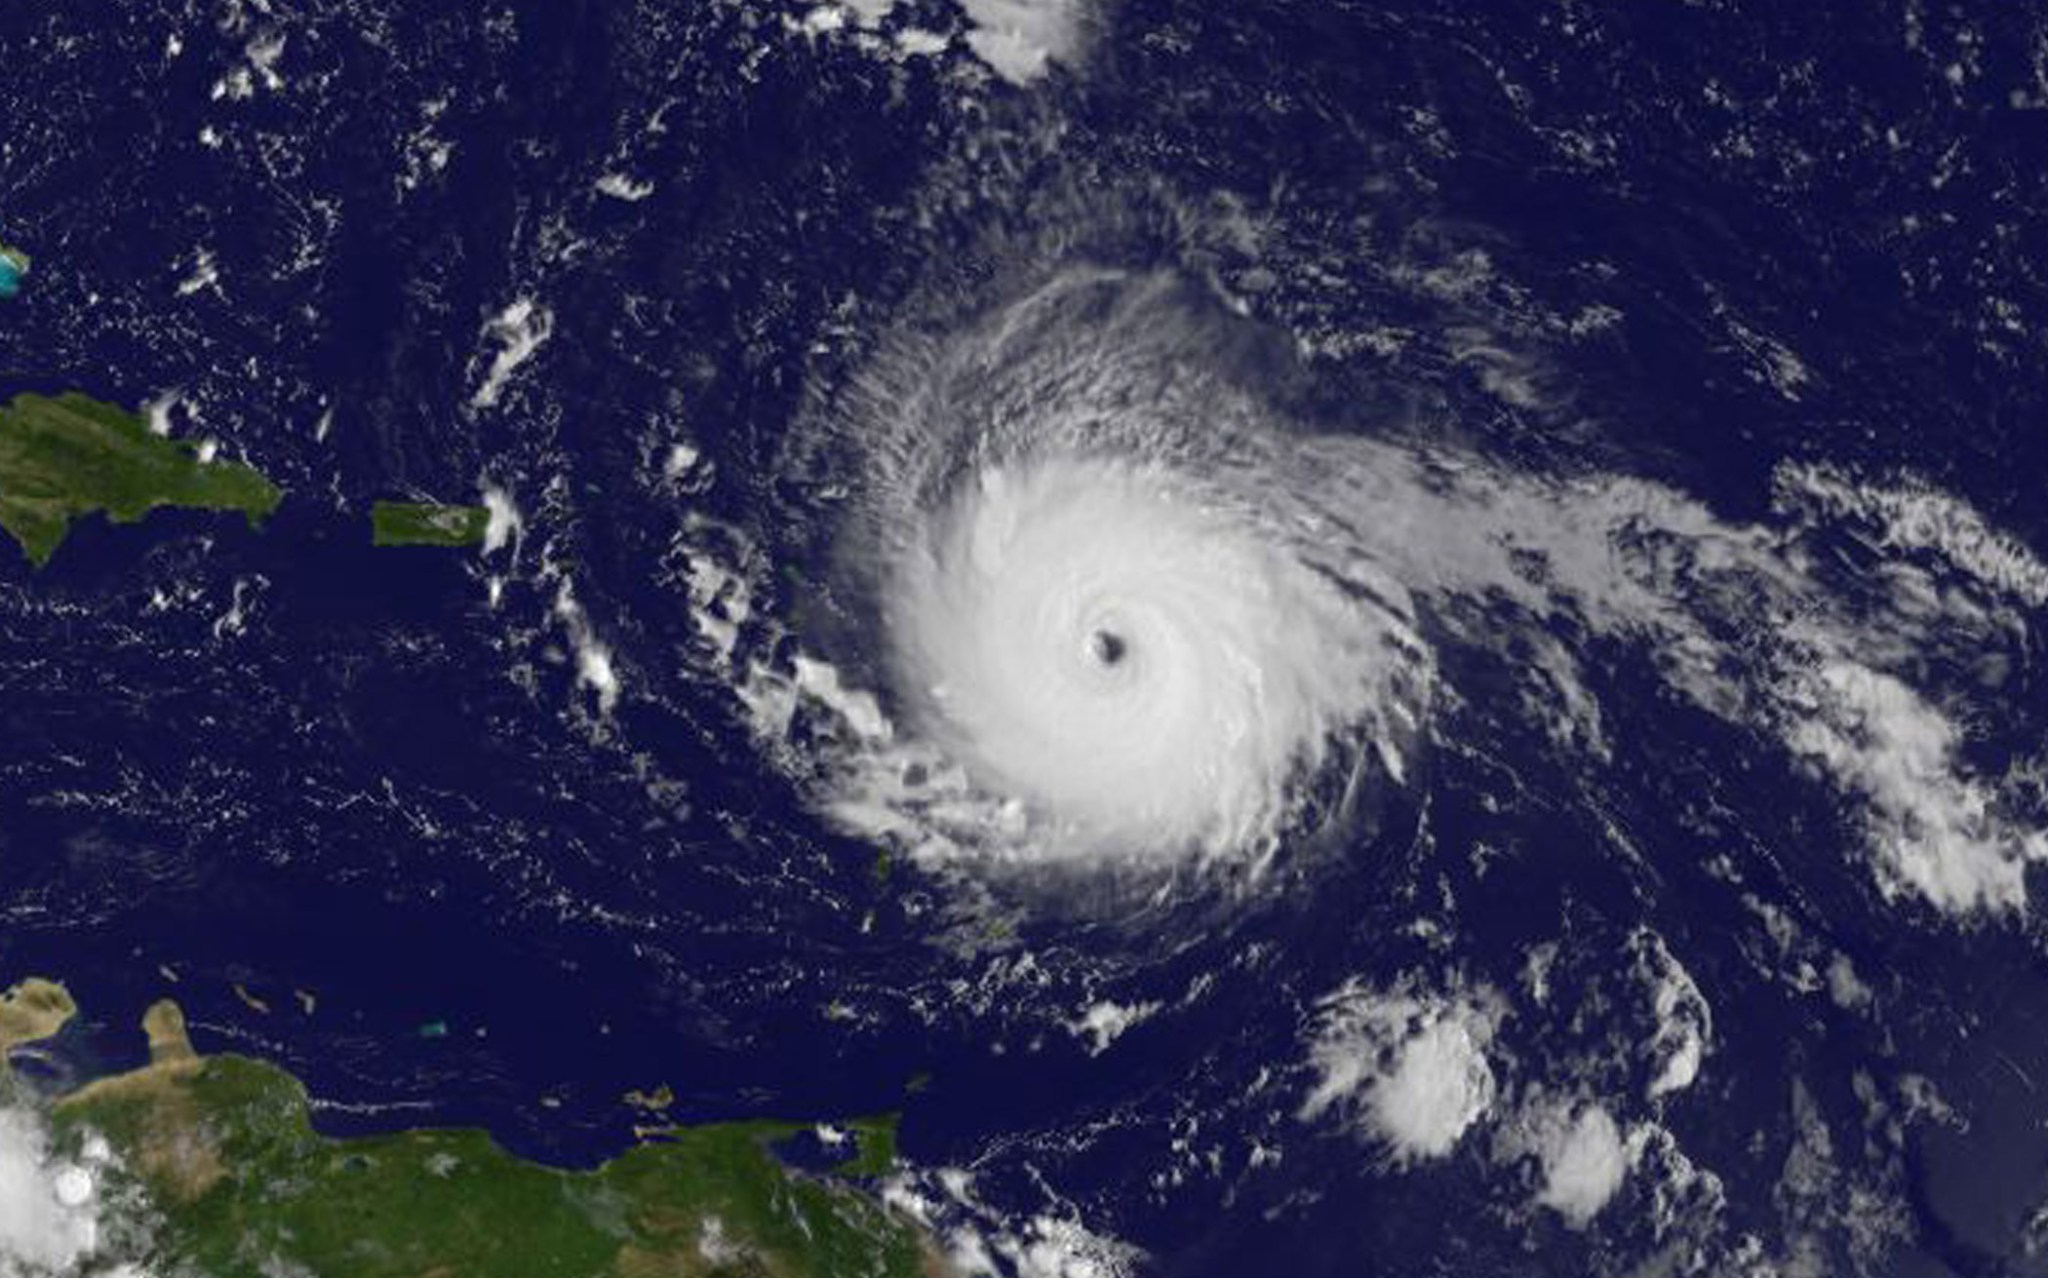 Satellite image of Irma, a swirling mass of clouds over the ocean.